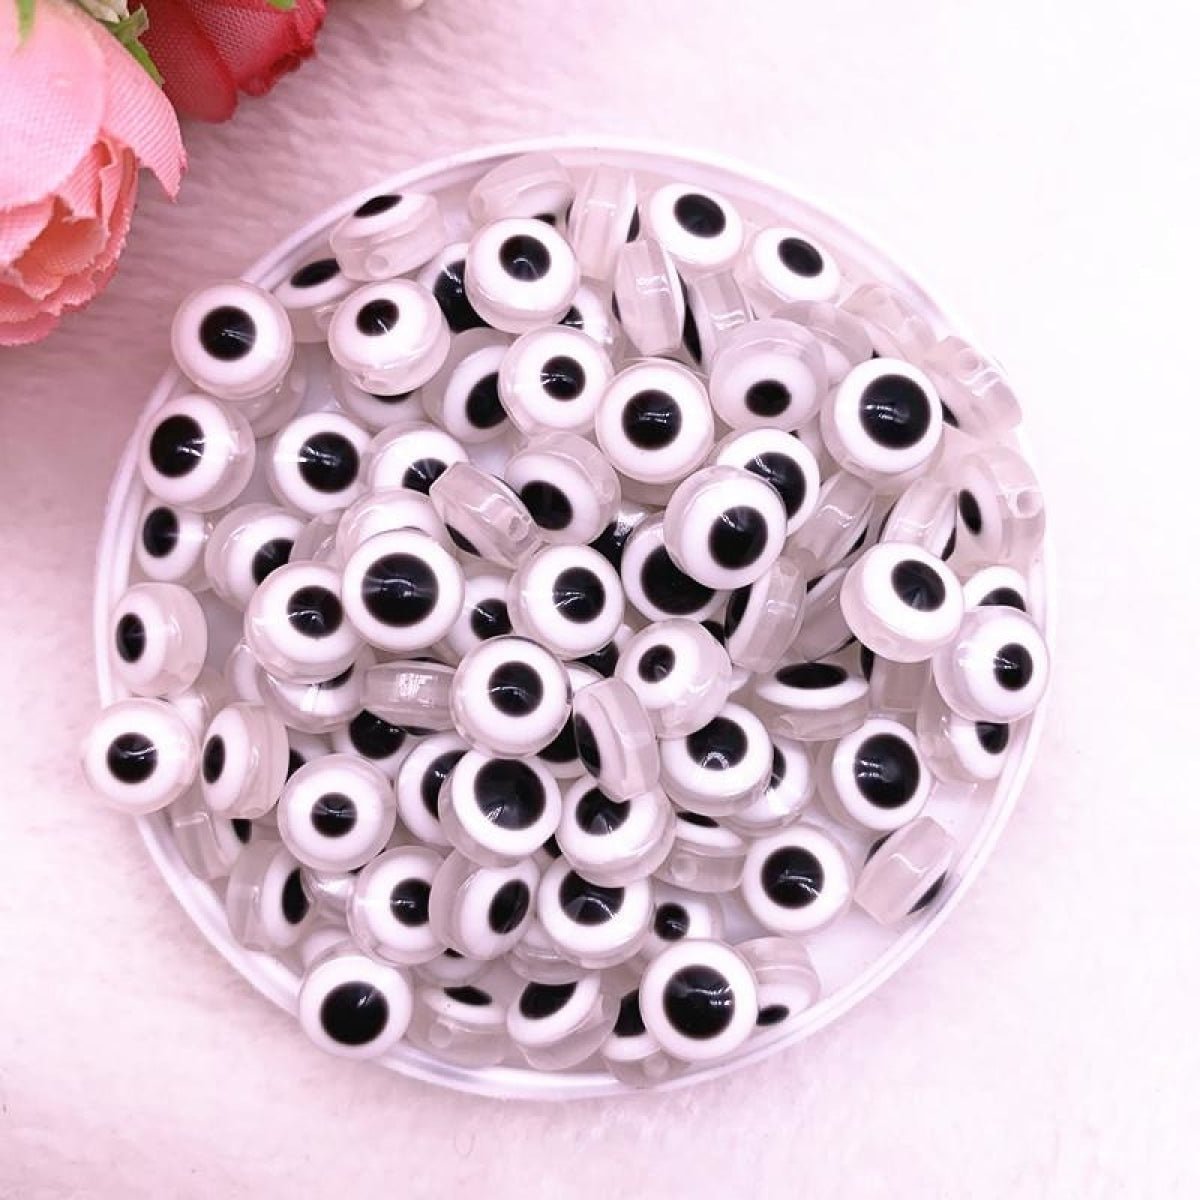 48pcs 8/10mm Oval Resin Spacer Beads Double Sided Eyes for Jewellery Making DIY Bracelet Beads Set B - White 8mm - - Asia Sell